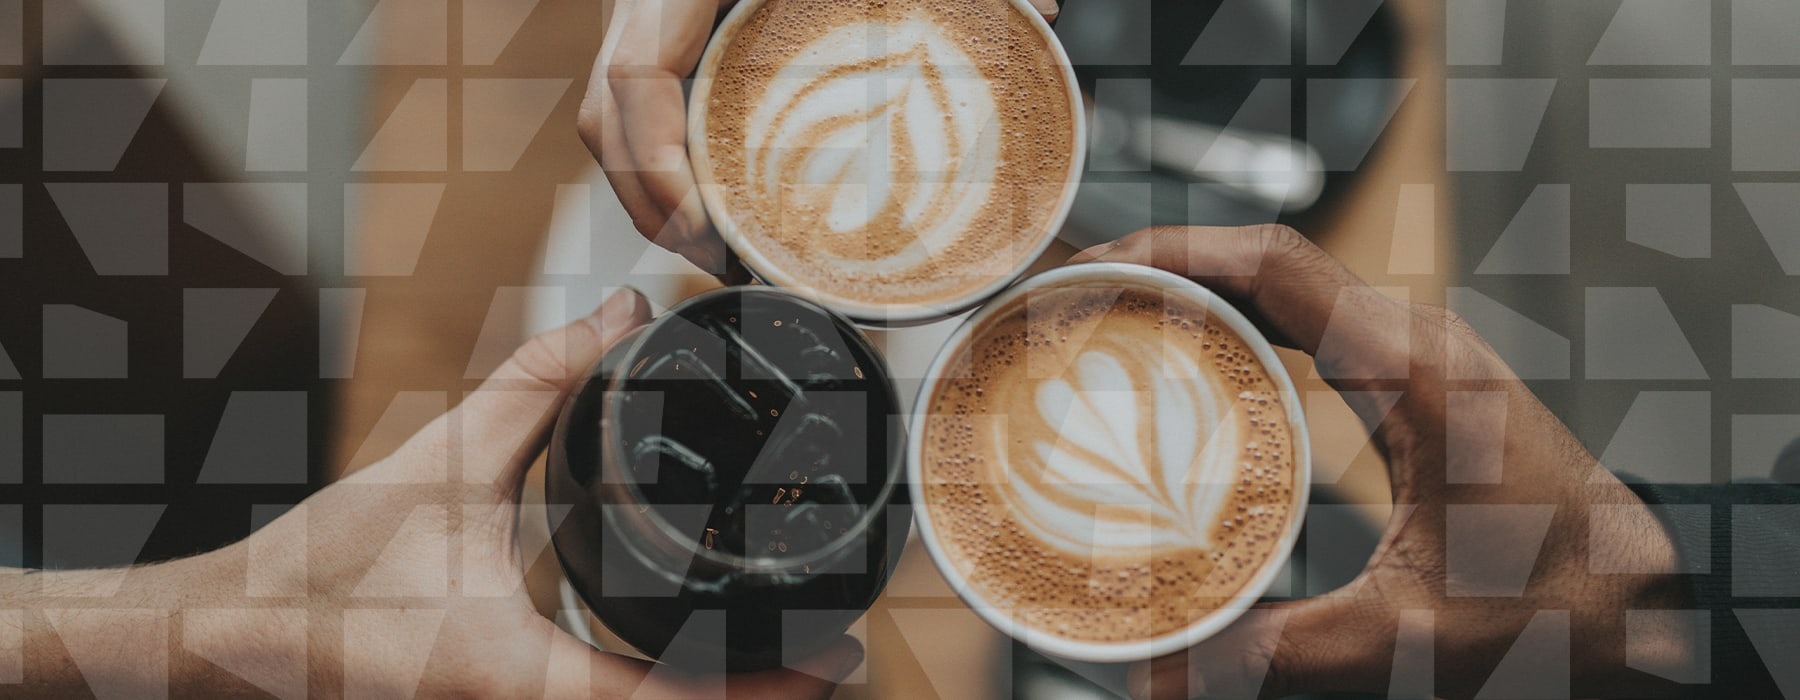 edited graphic of hands pushing their coffee drinks together